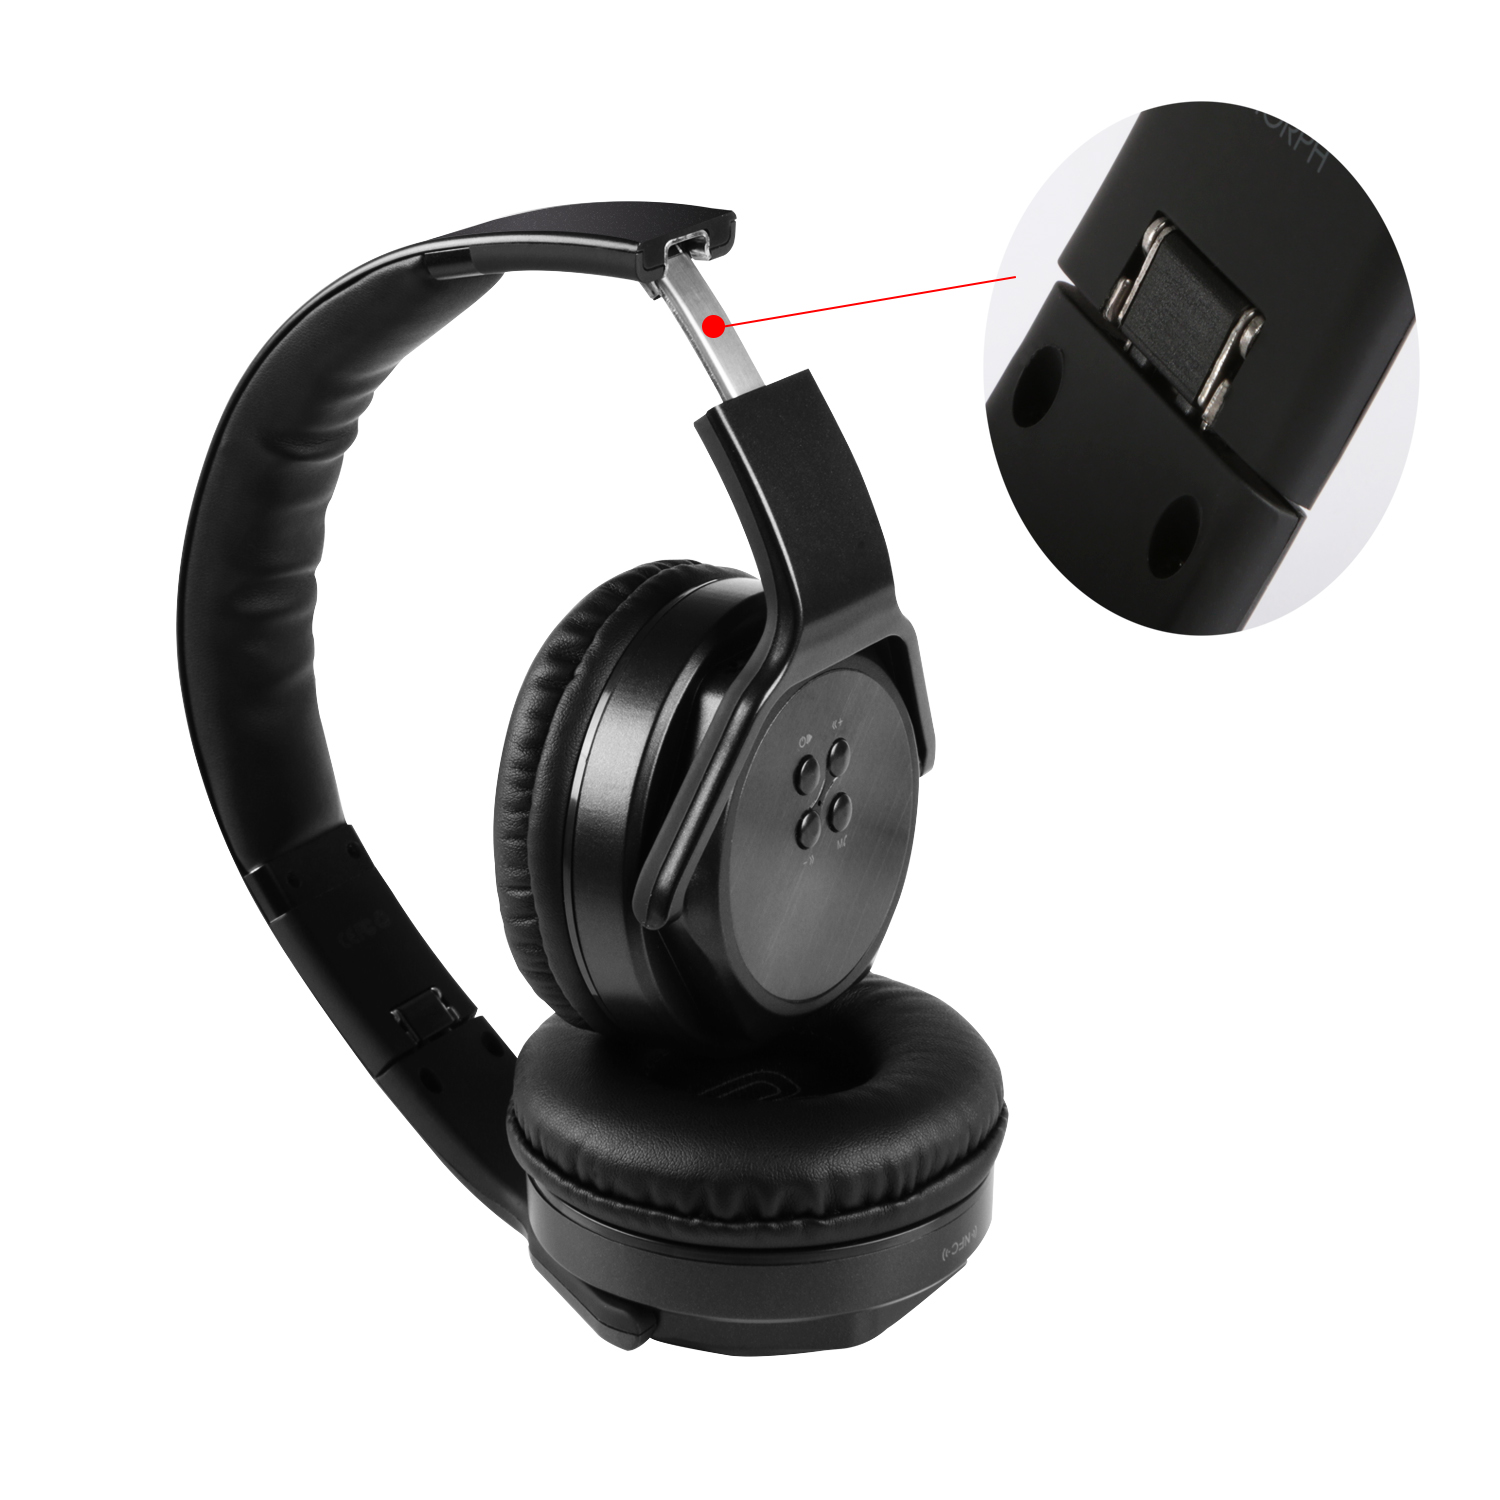 KOCASO HP-530 [Wireless / Foldable] Headphones With Built-in Speaker Mode - image 2 of 9